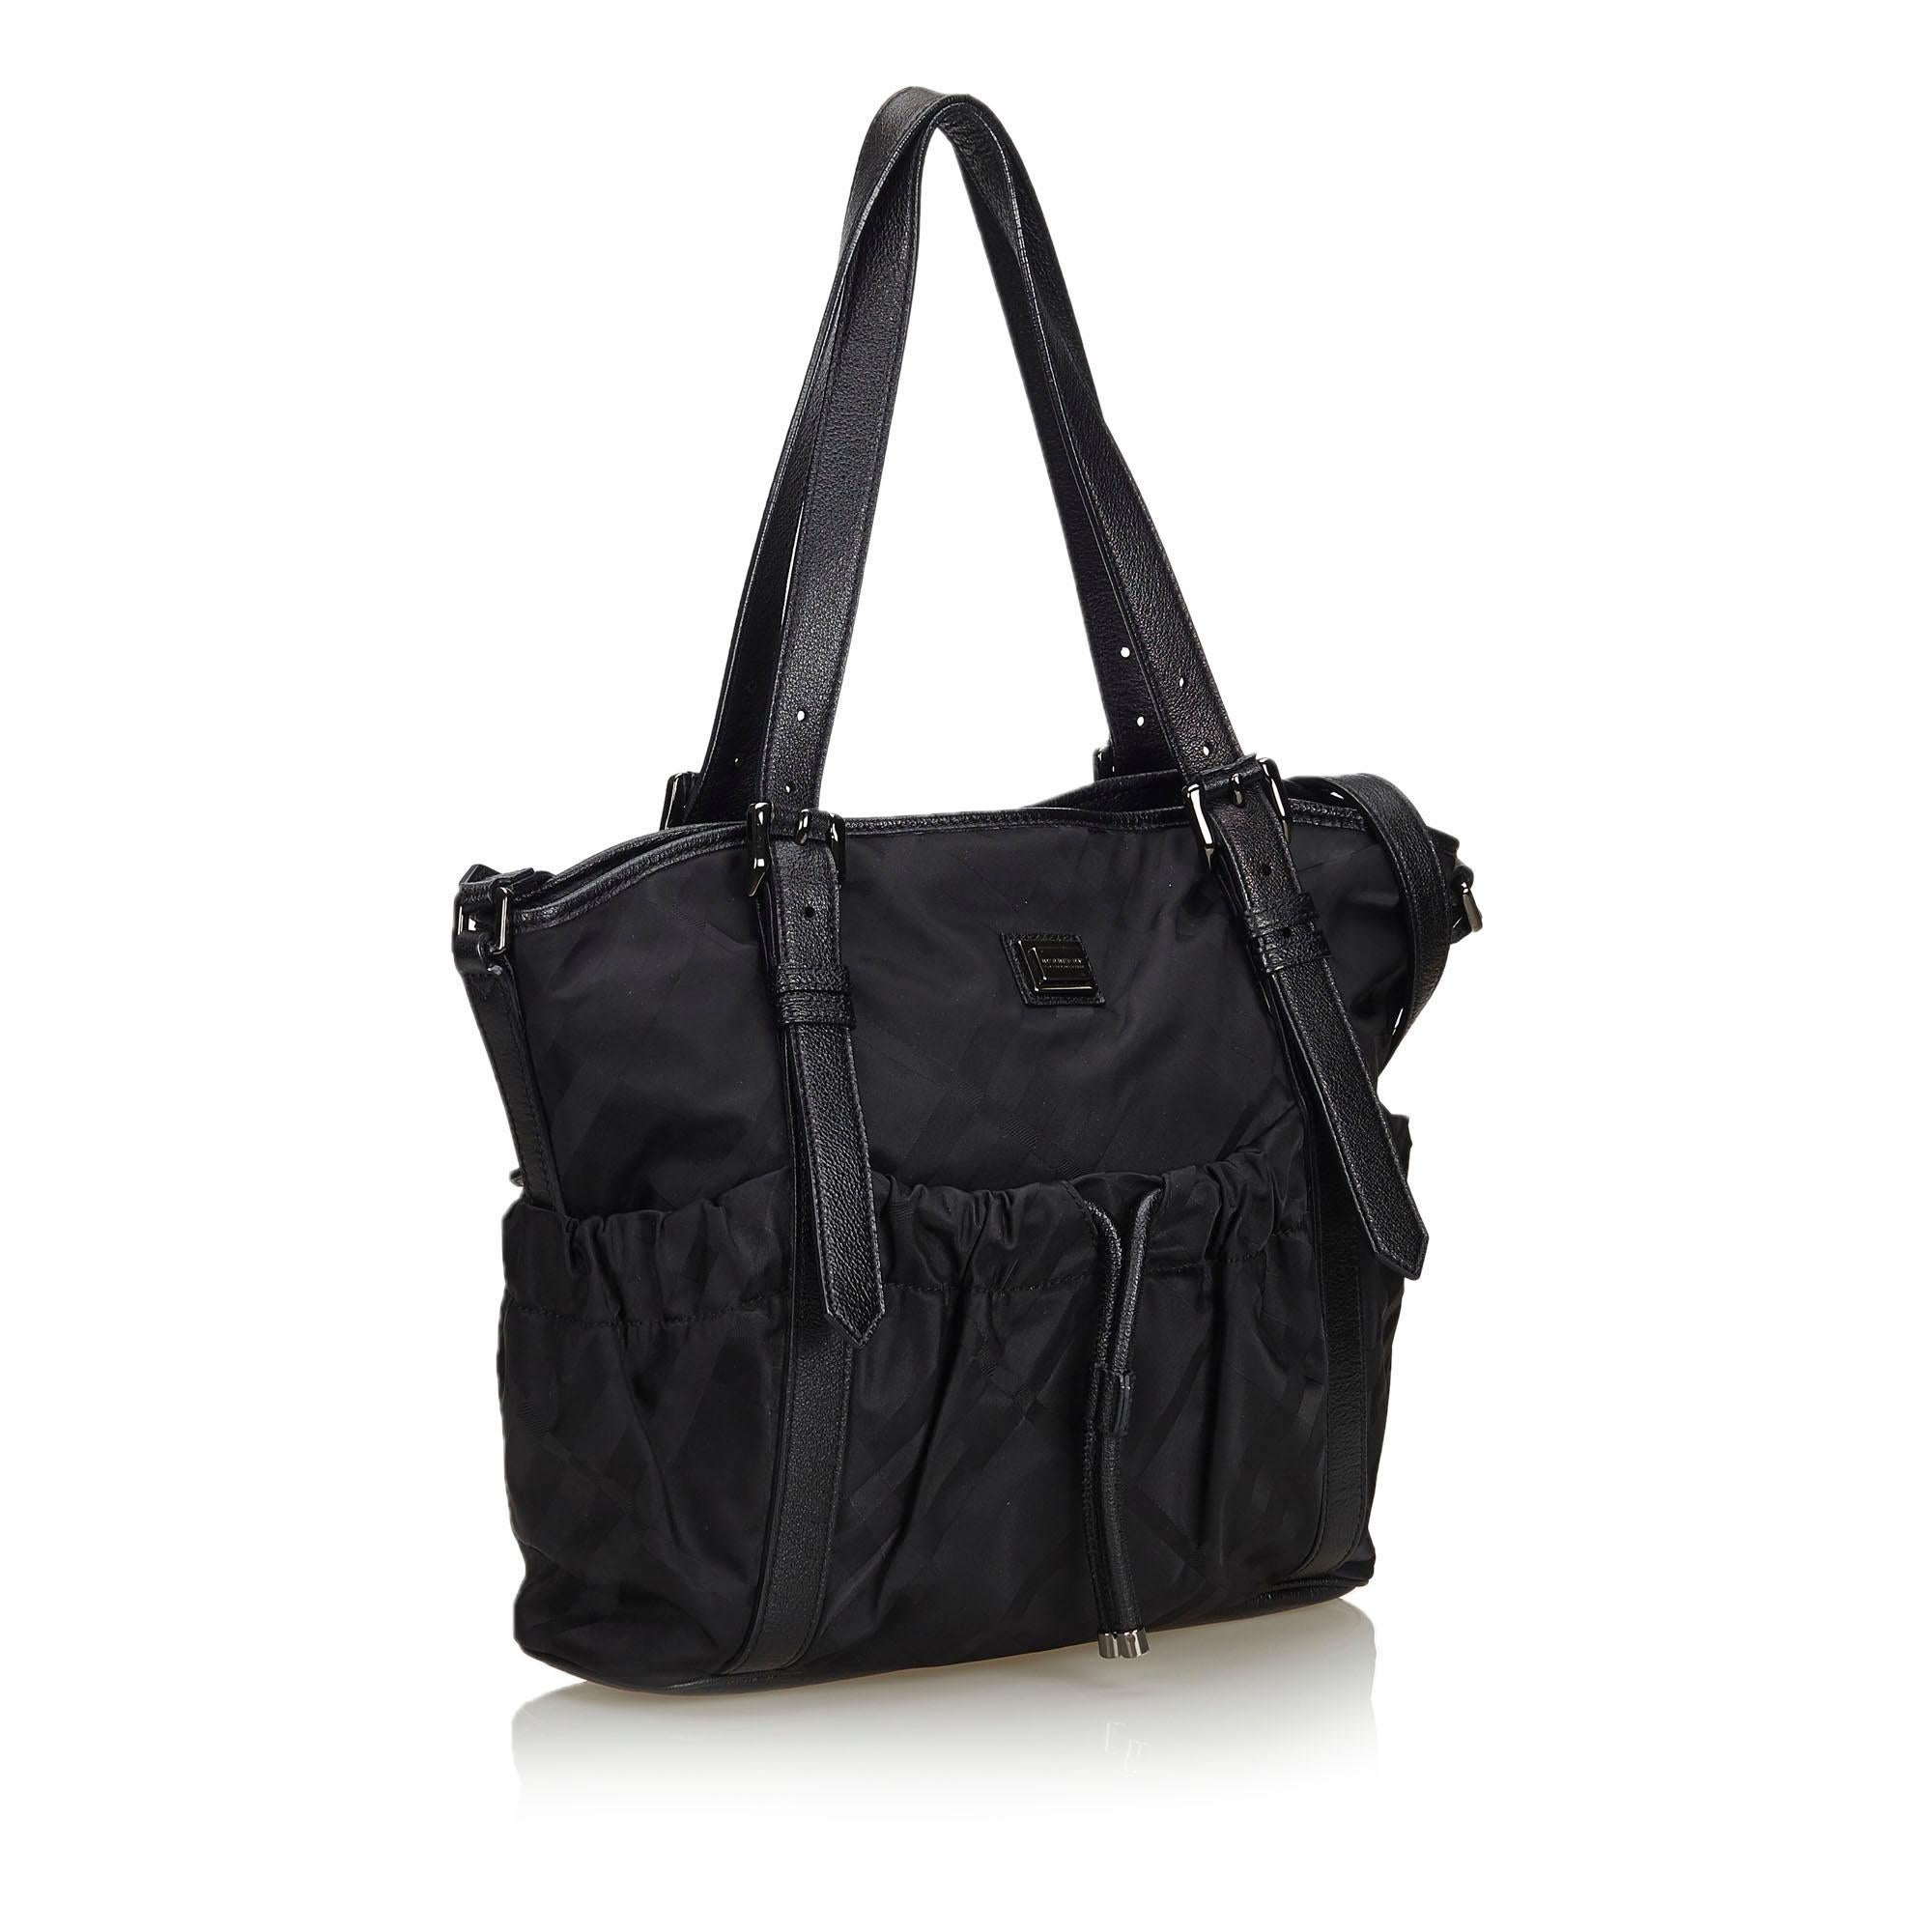 This satchel features a nylon body with leather trim, front and back slip pockets with a drawstring closure, flat leather handles, a flat leather strap, a top zip closure, and interior zip and slip pockets. It carries as B+ condition